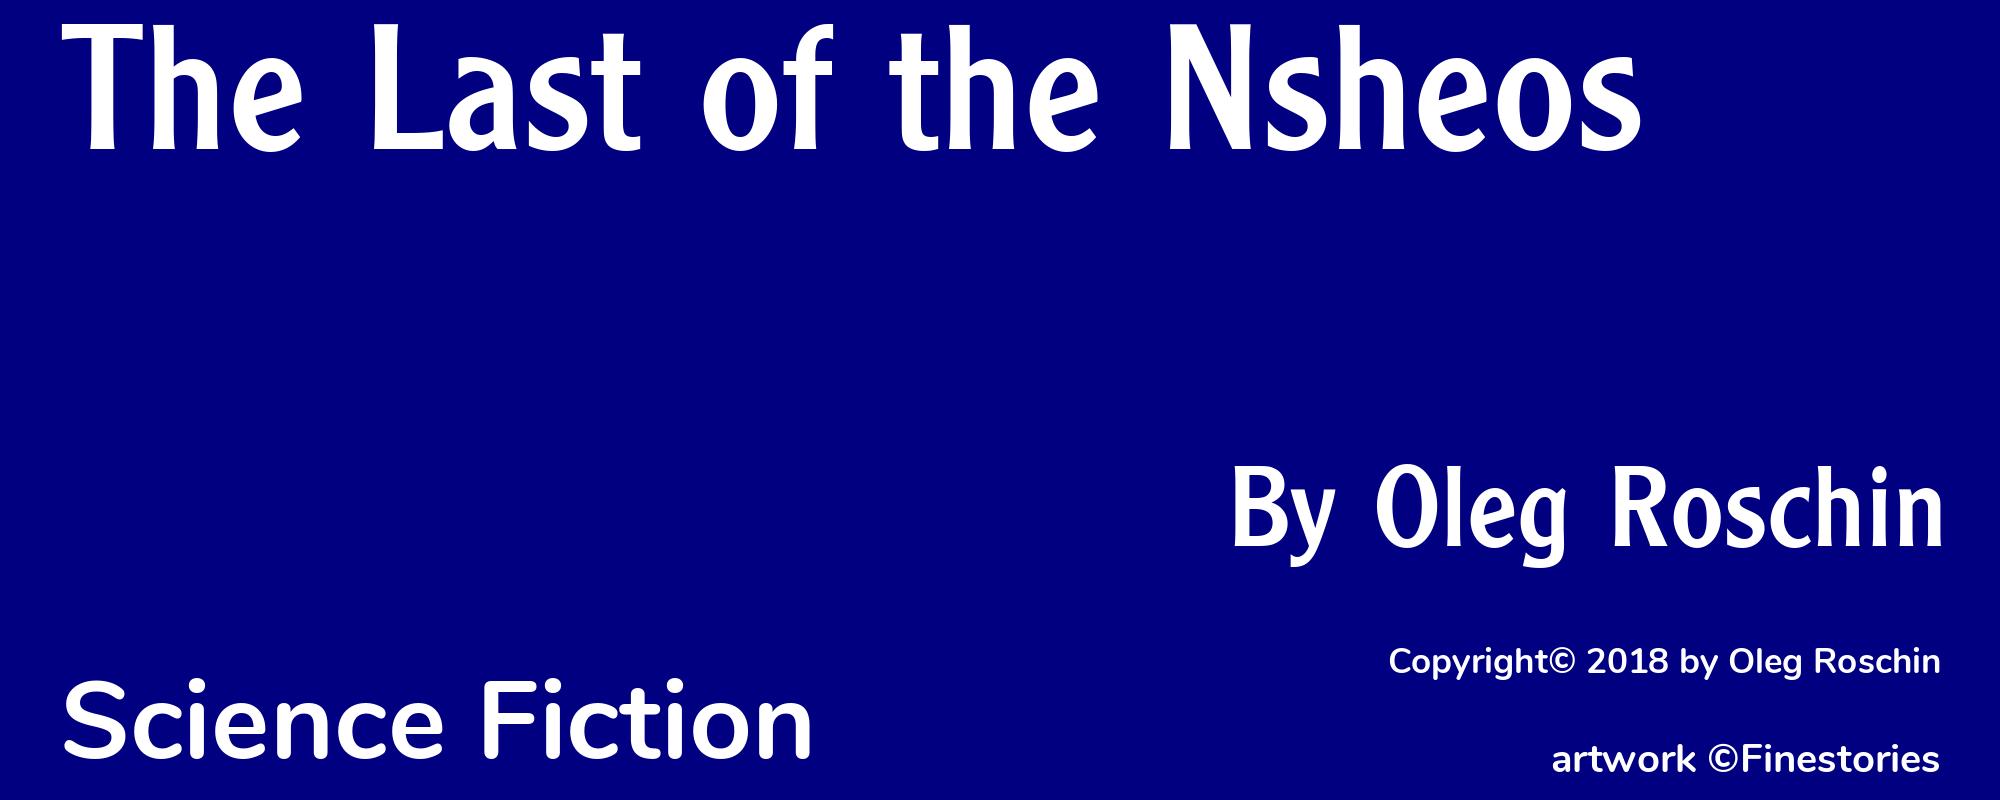 The Last of the Nsheos - Cover